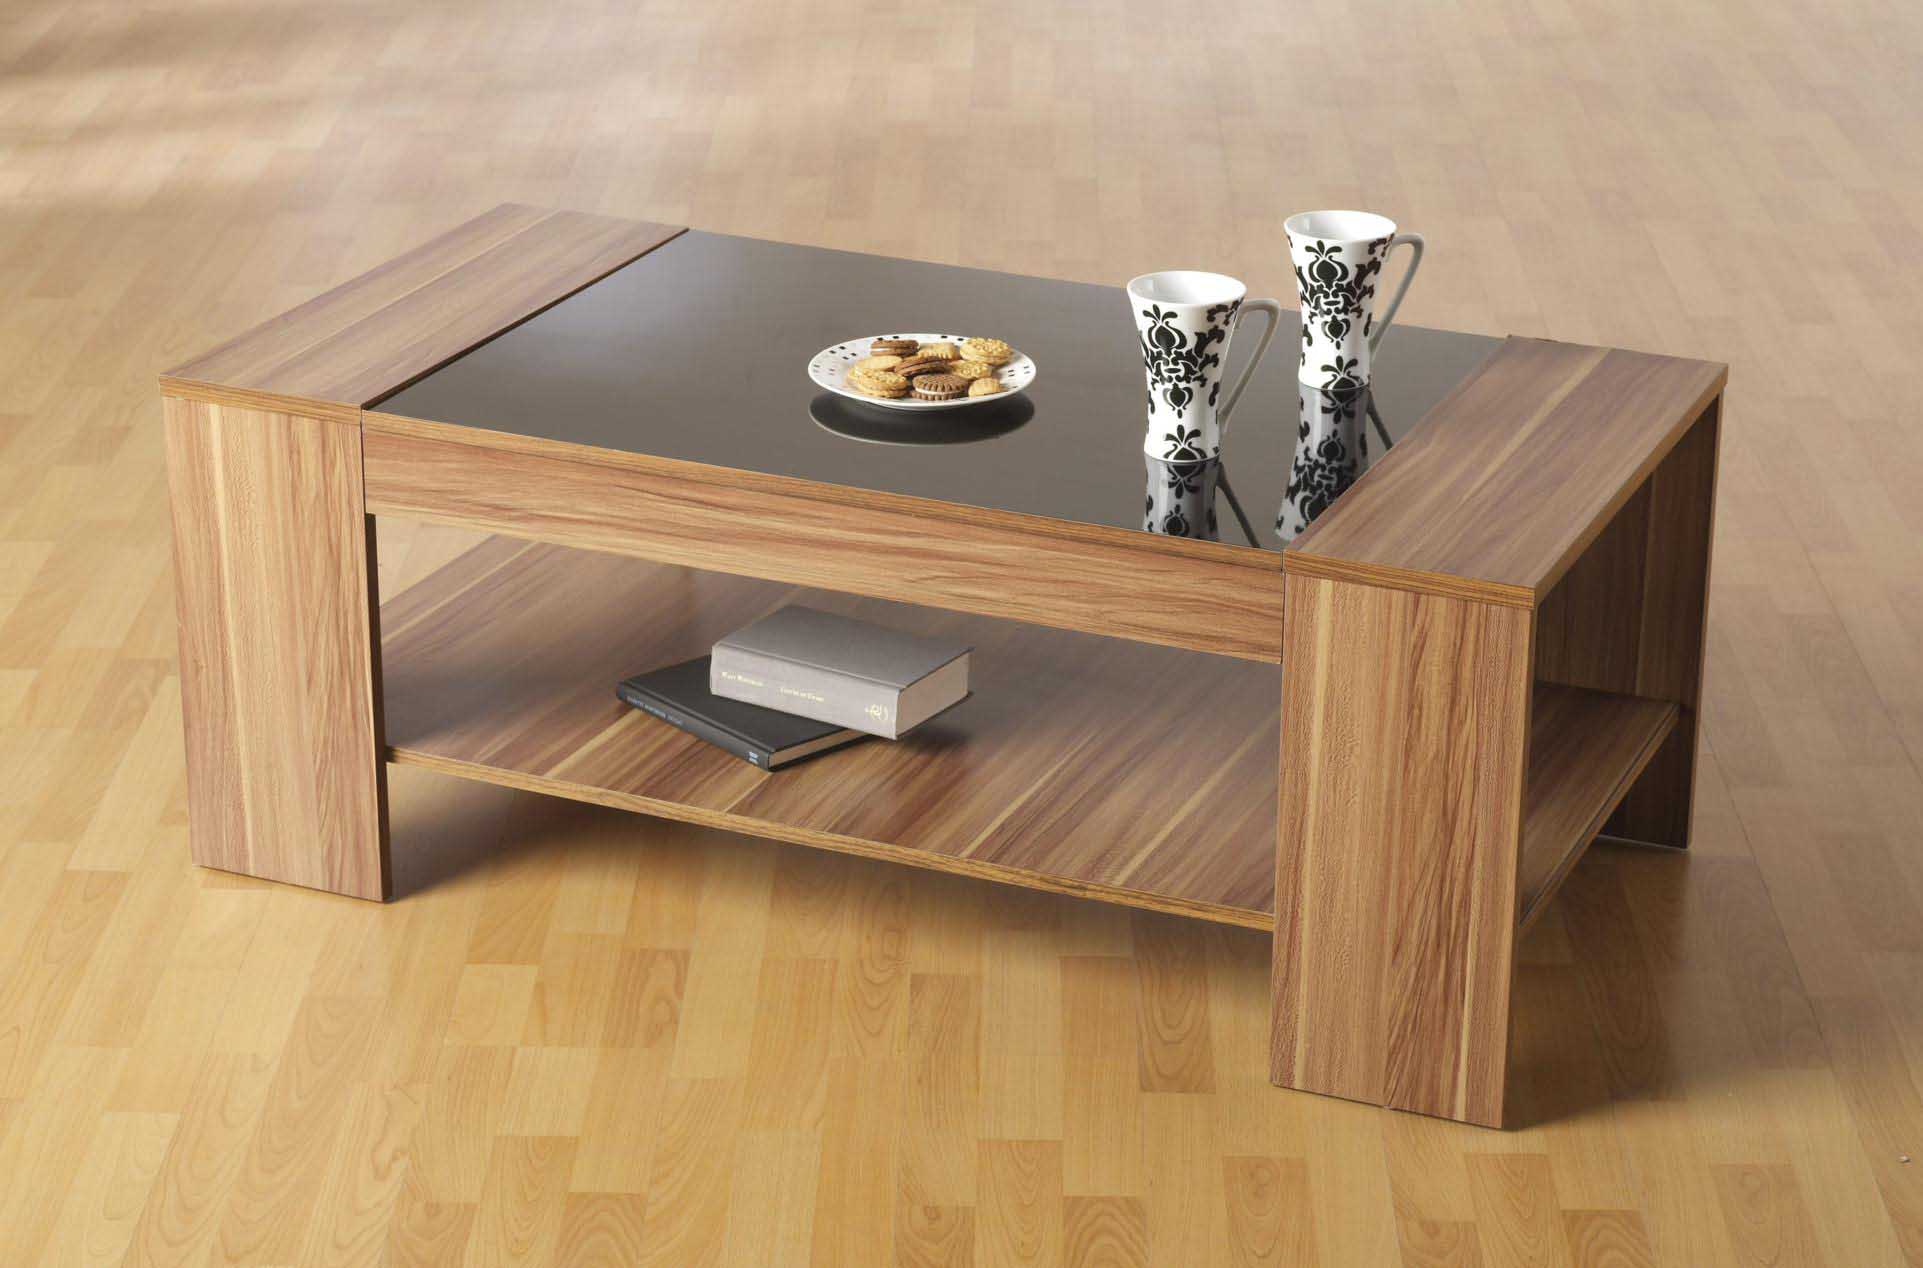 great coffee table design photo - 6